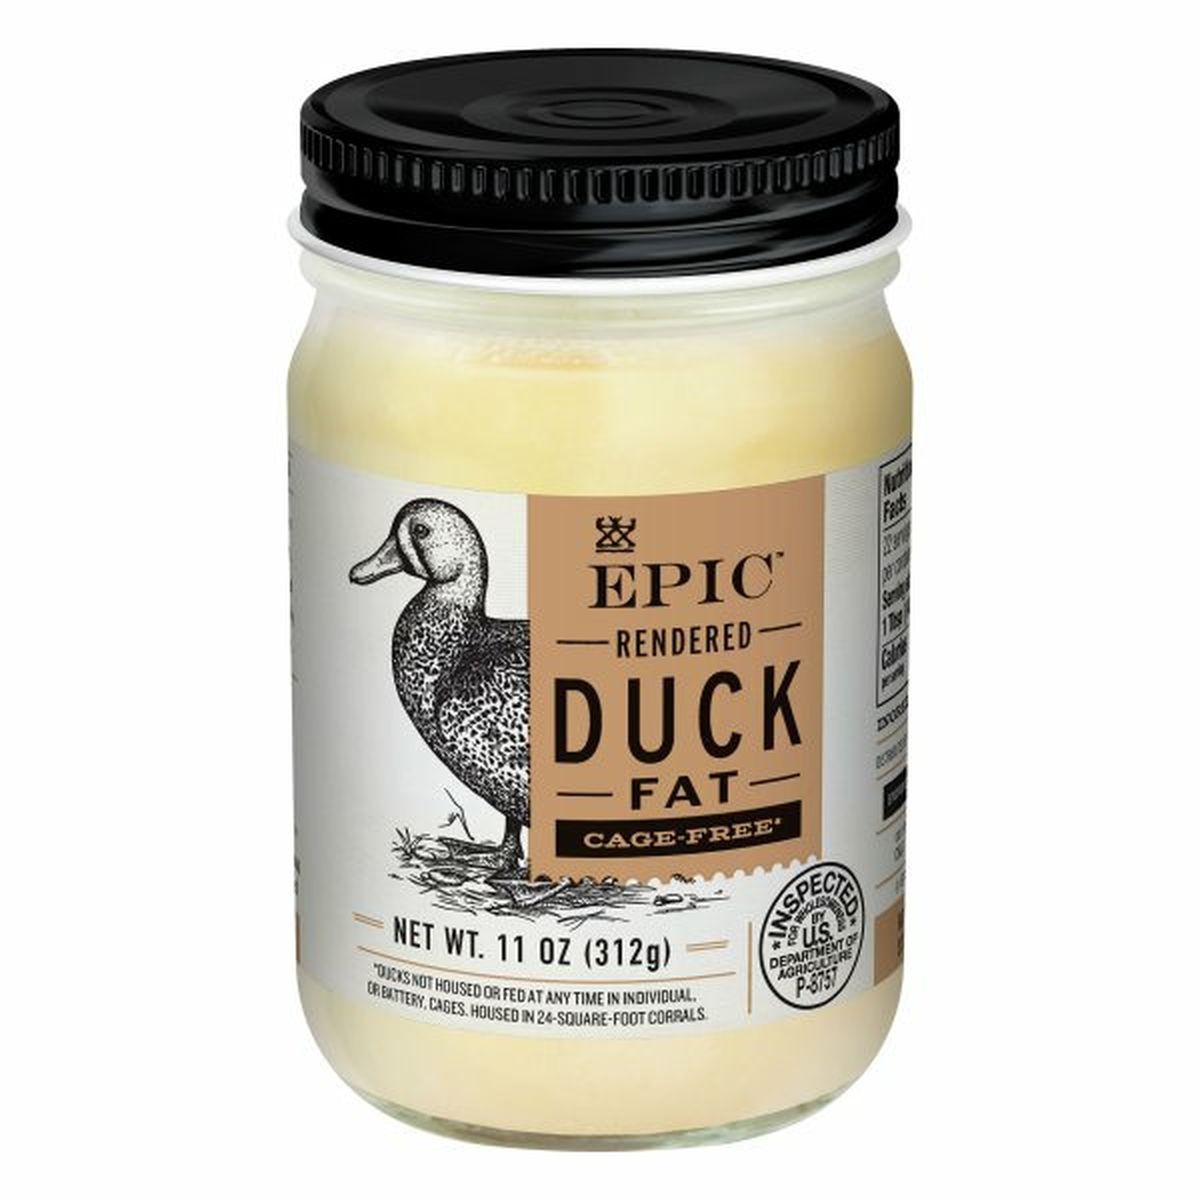 Calories in Epic Duck Fat, Rendered